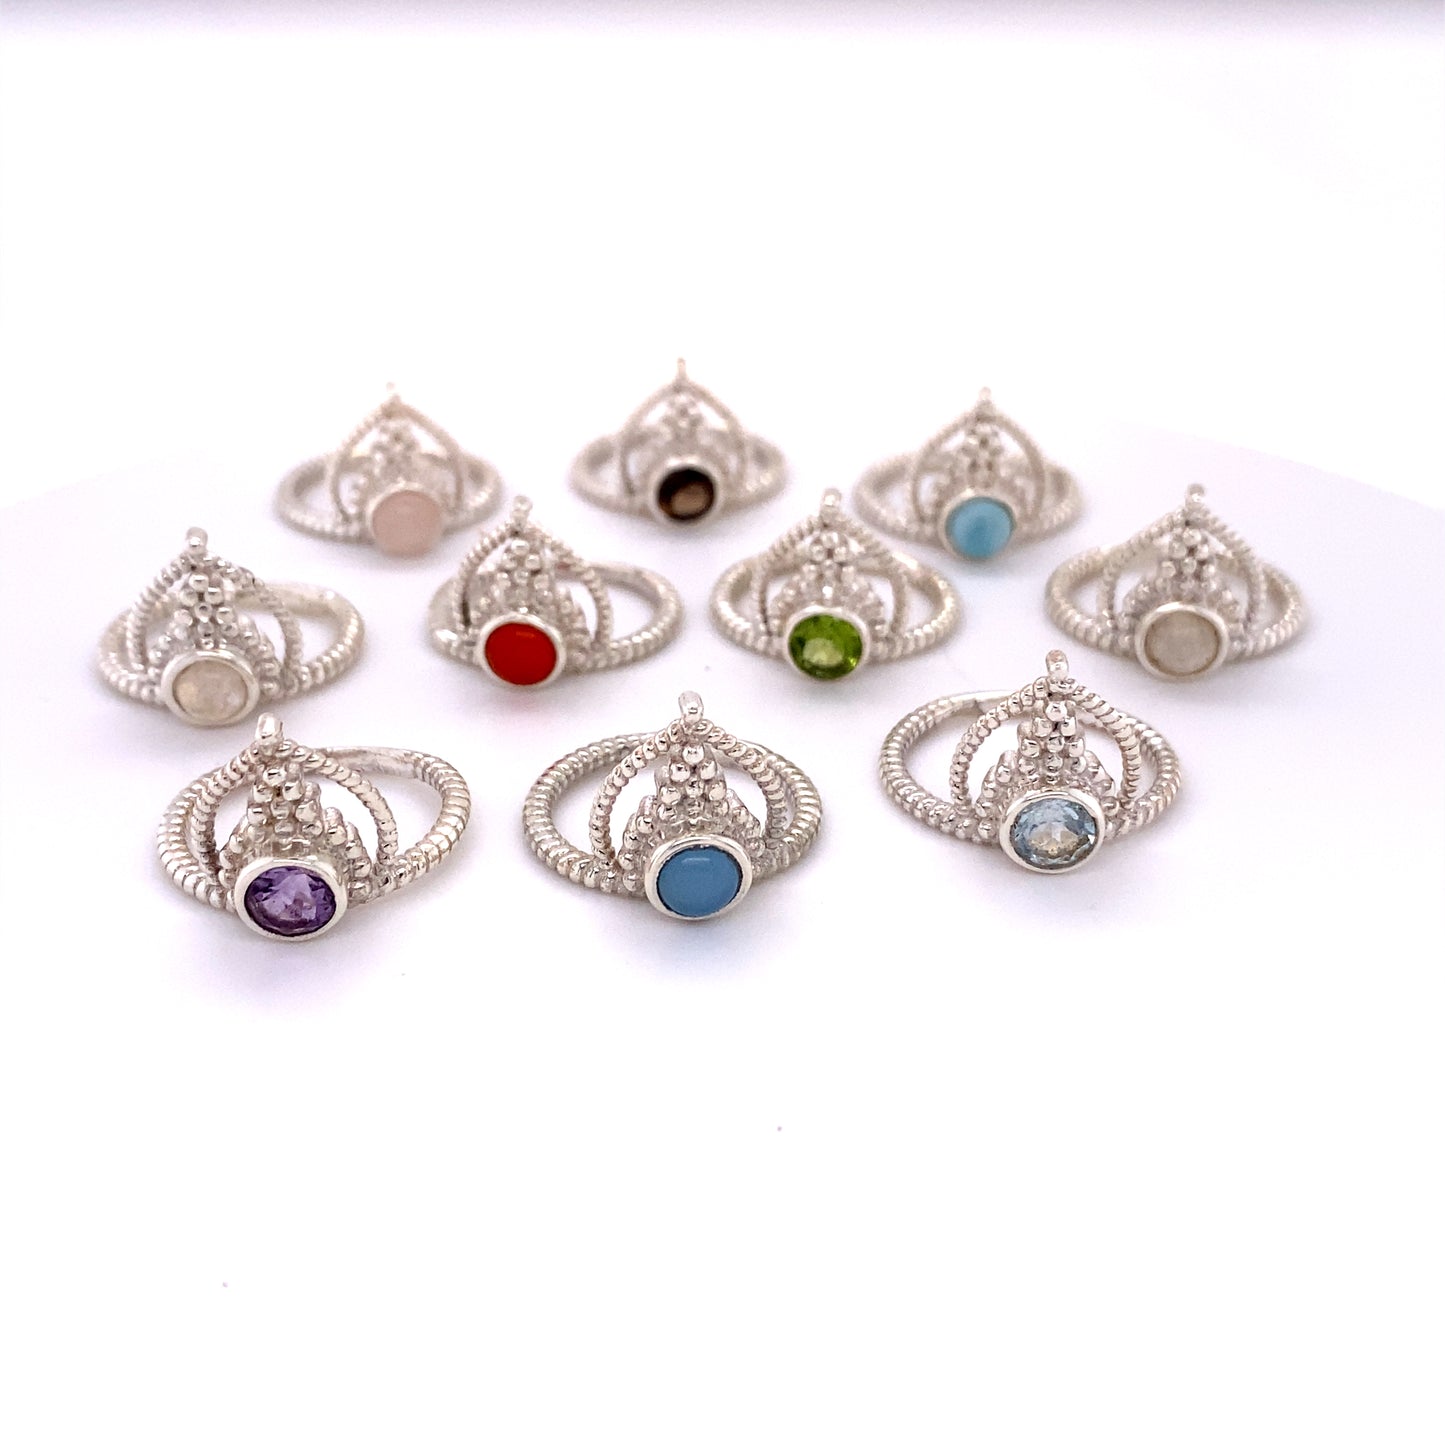 A Simple Tiara Ring with Natural Gemstones in various colors.